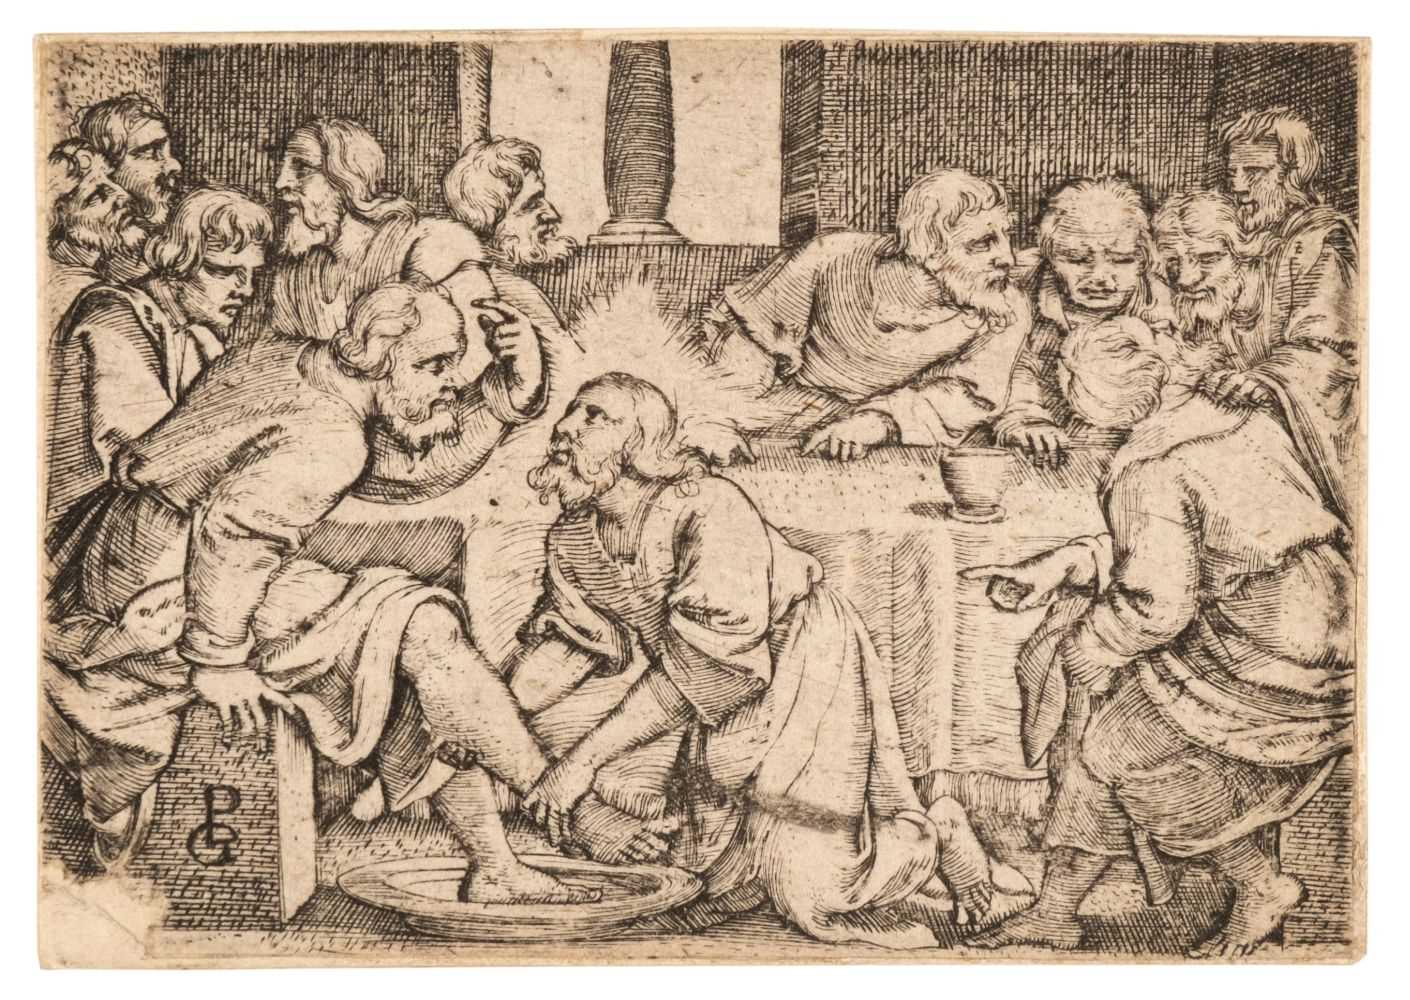 Lot 2 - Pencz (G., c. 1500-1550). Christ washing the Disciples’ Feet, 1534, engraving, and 9 others